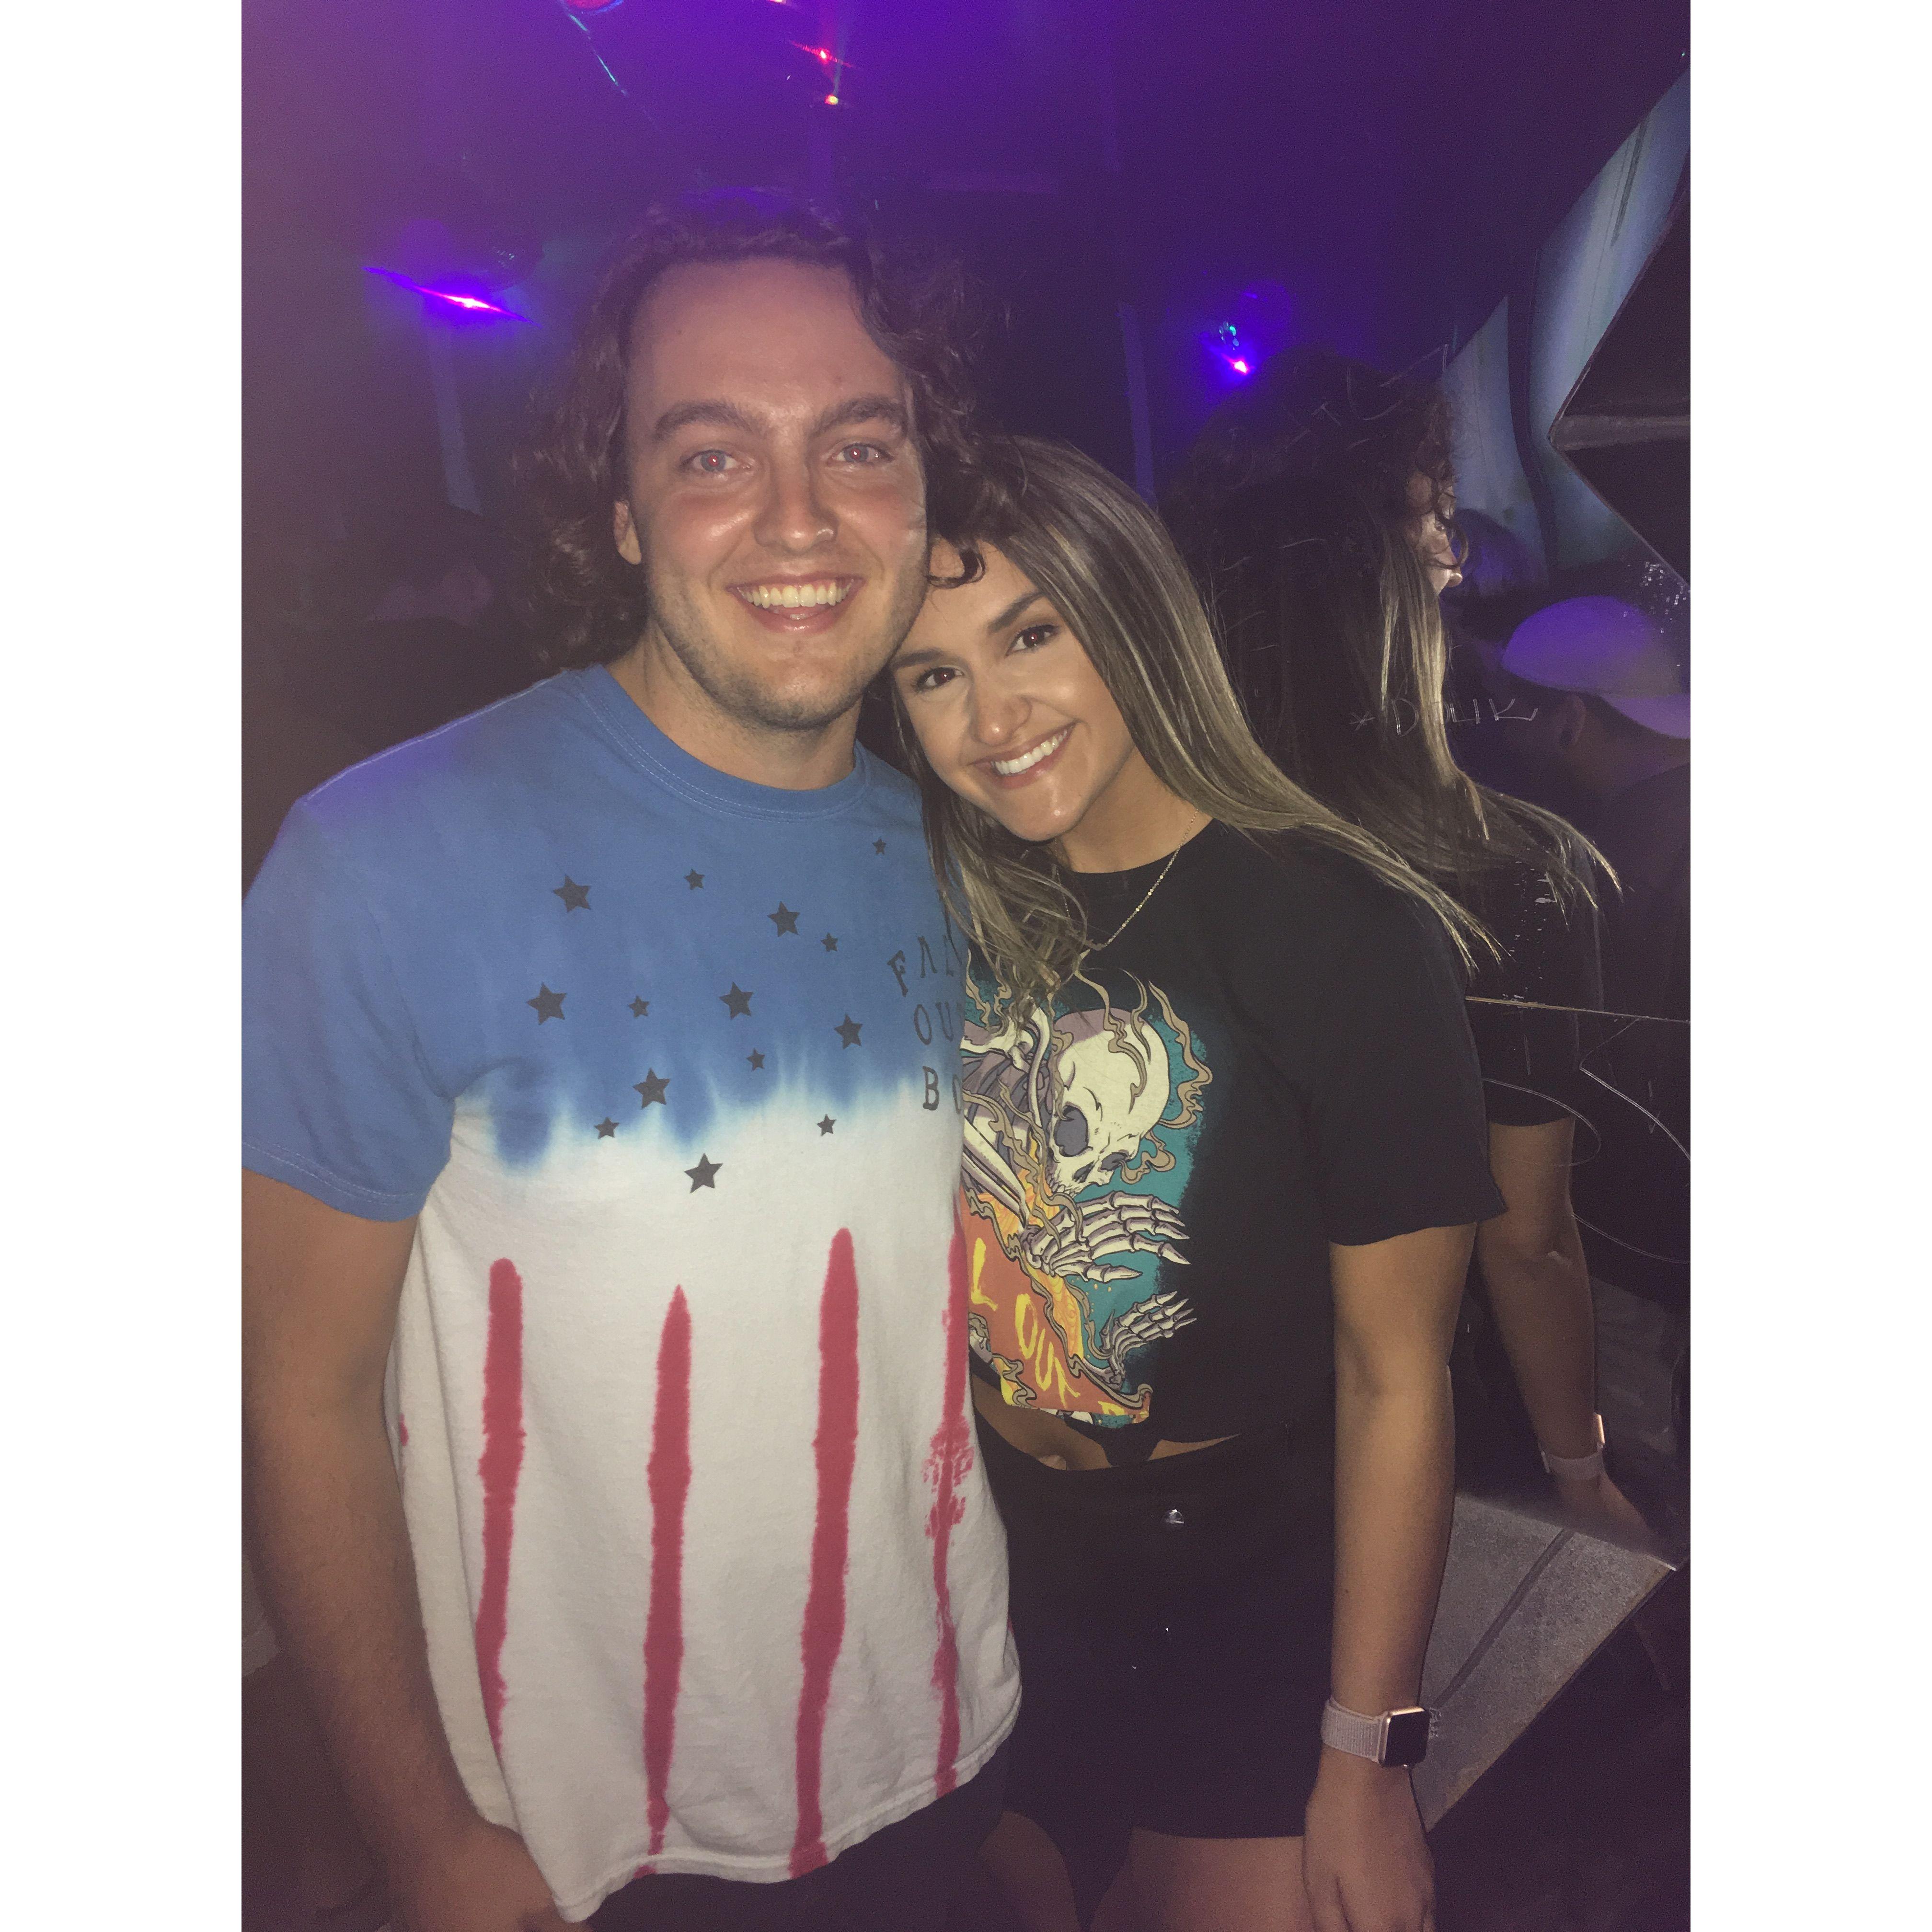 Our first photo together - Emo Night at Barbarellas Houston 2019